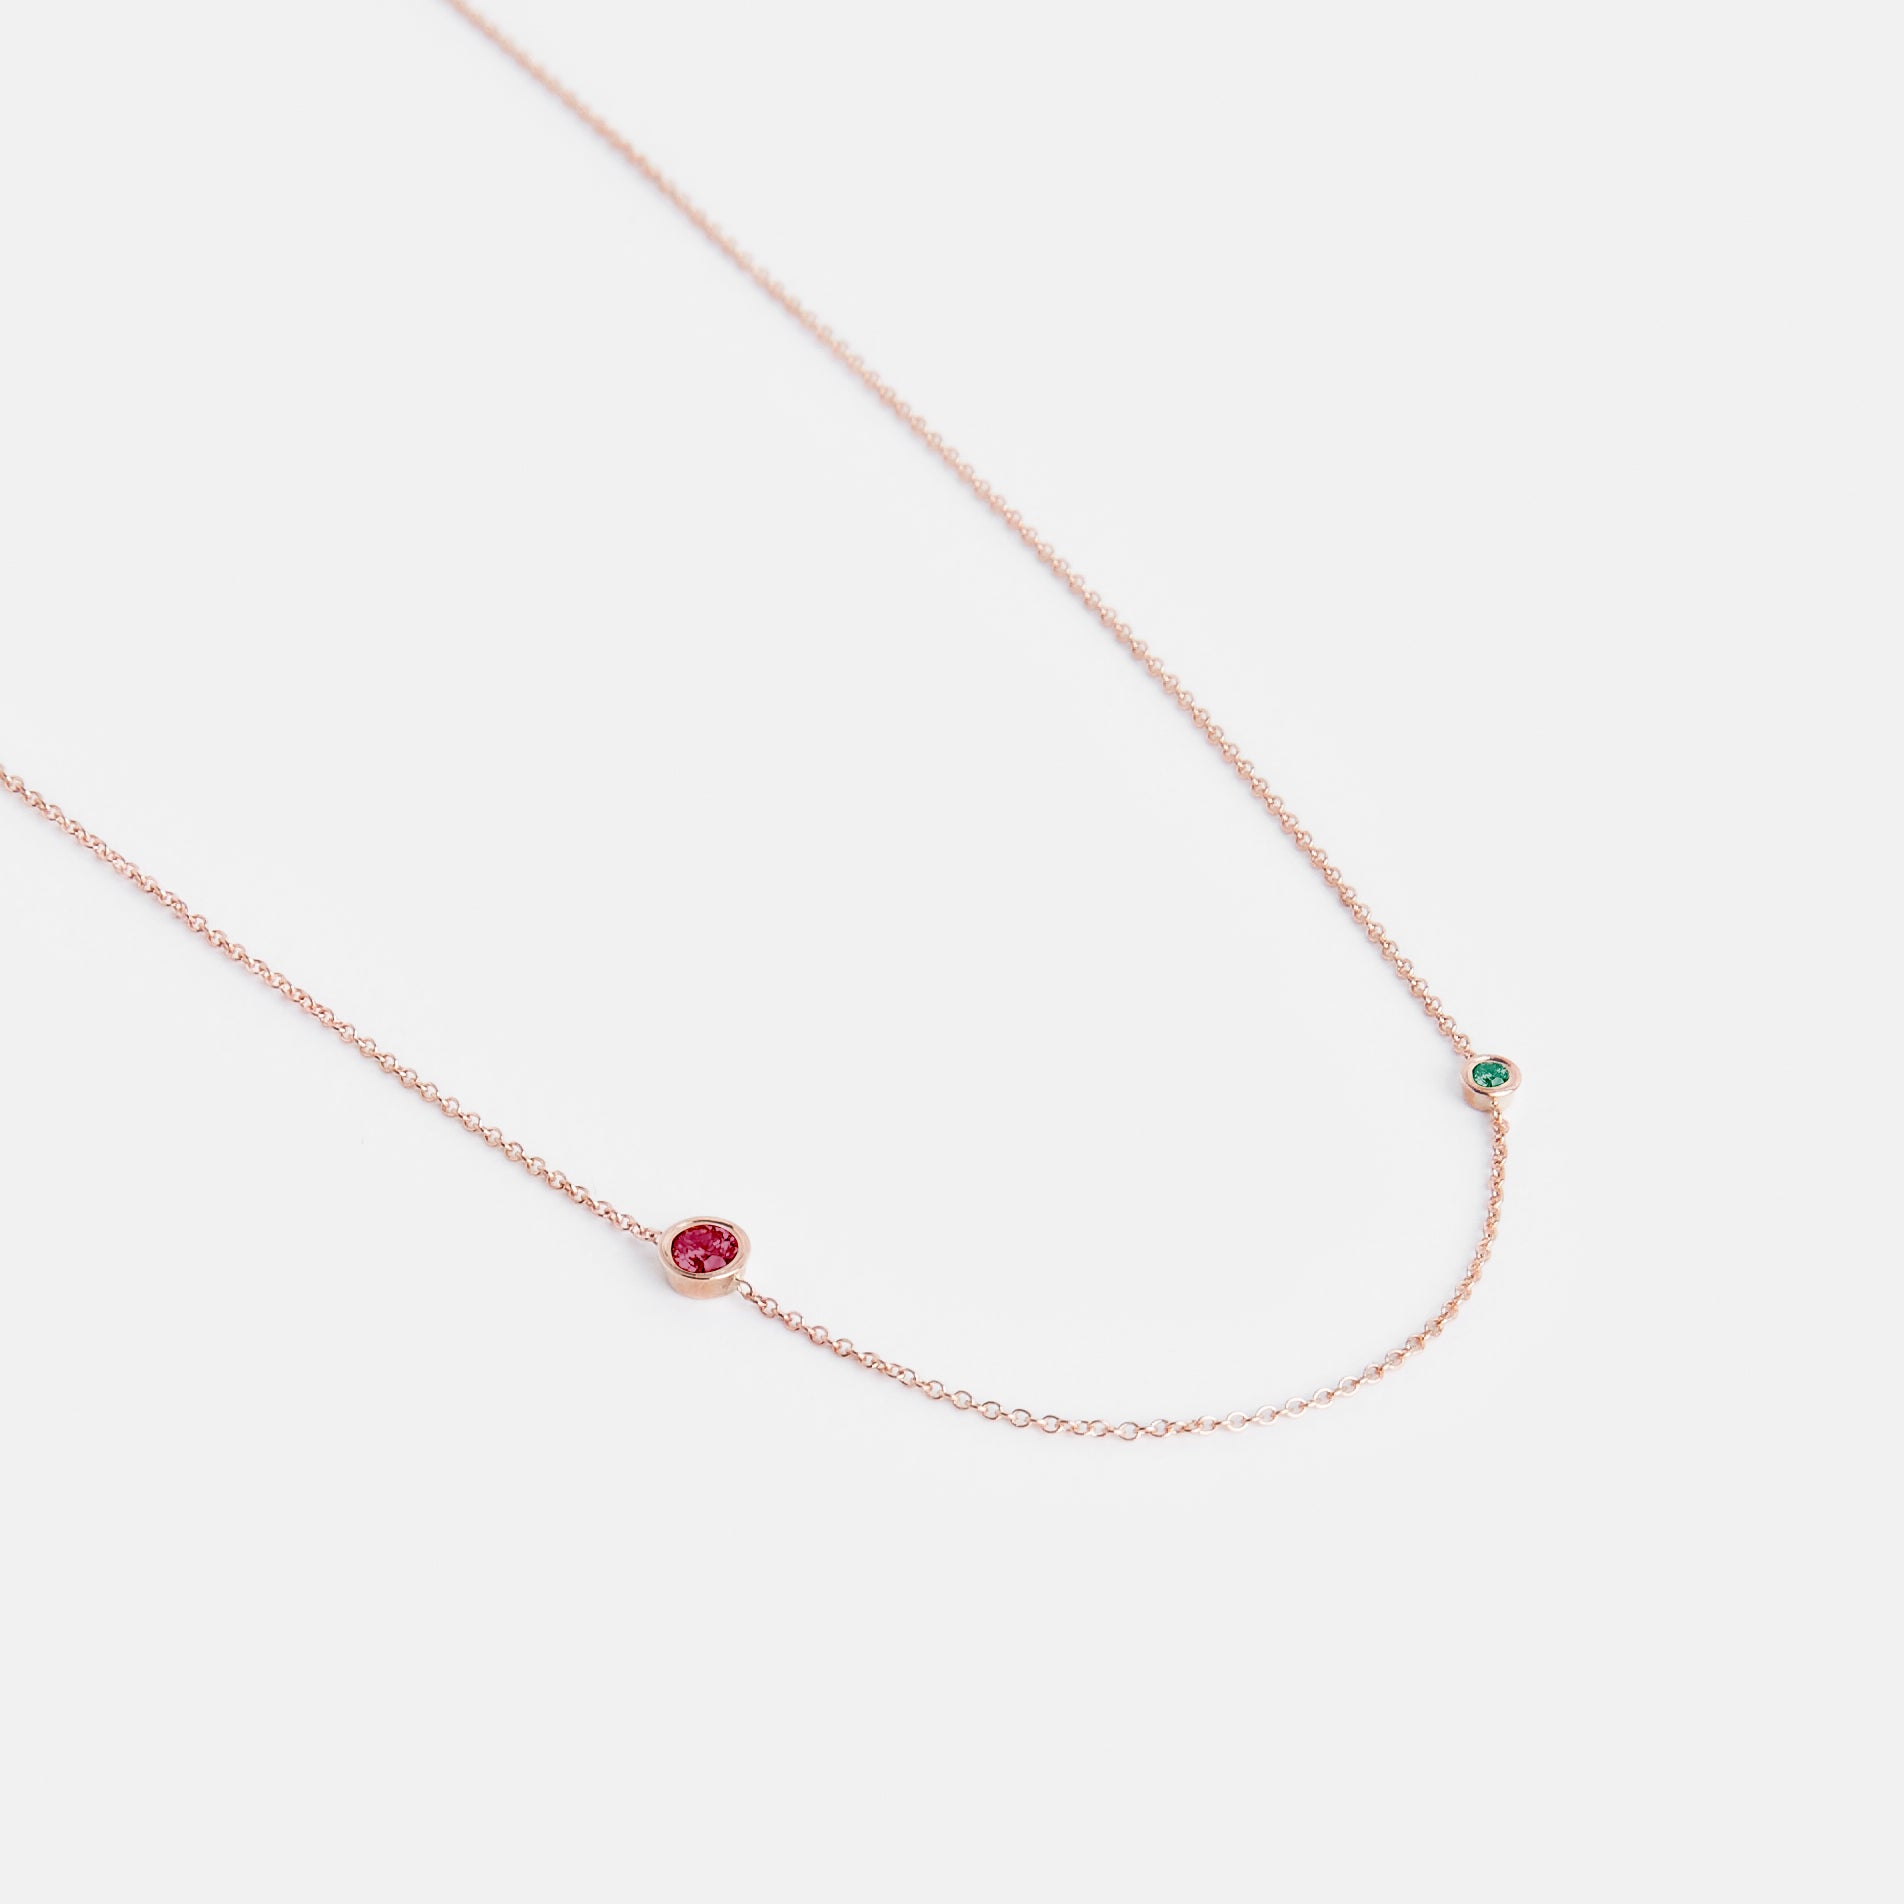 Iba Designer Necklace in 14k Rose Gold set with Ruby and Emerald By SHW Fine Jewelry NYC